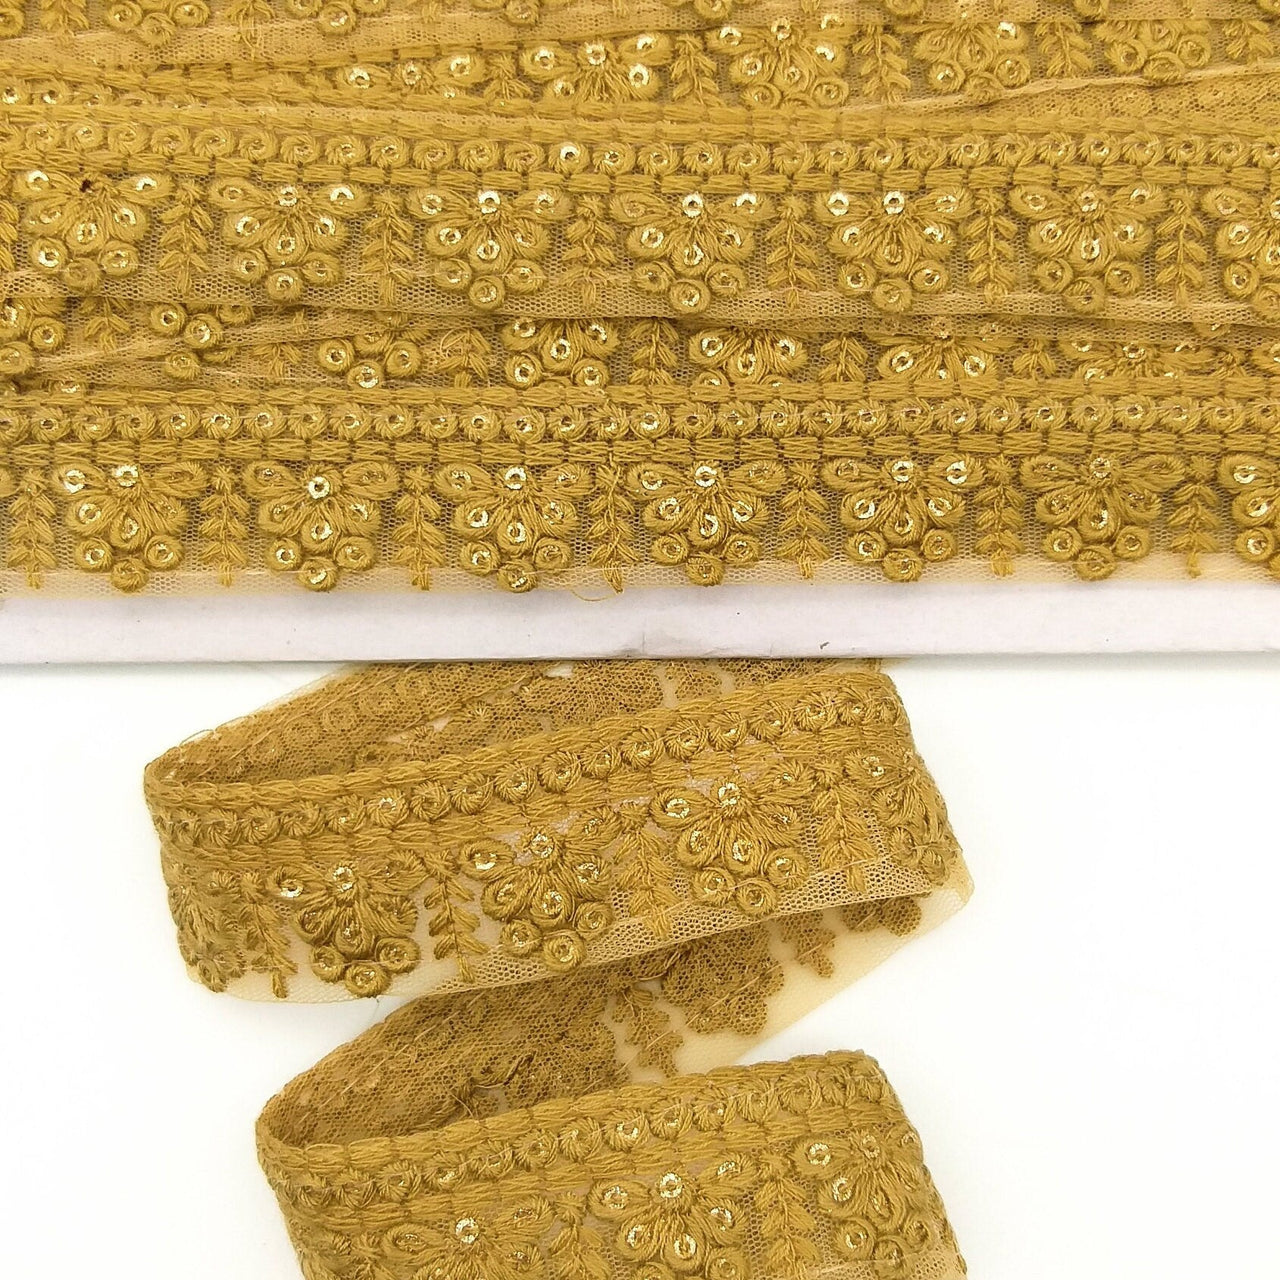 Brown Net Lace Trim With Floral Embroidery And Gold Sequins, Sequinned Trim, Wedding Trim Bridal Trim